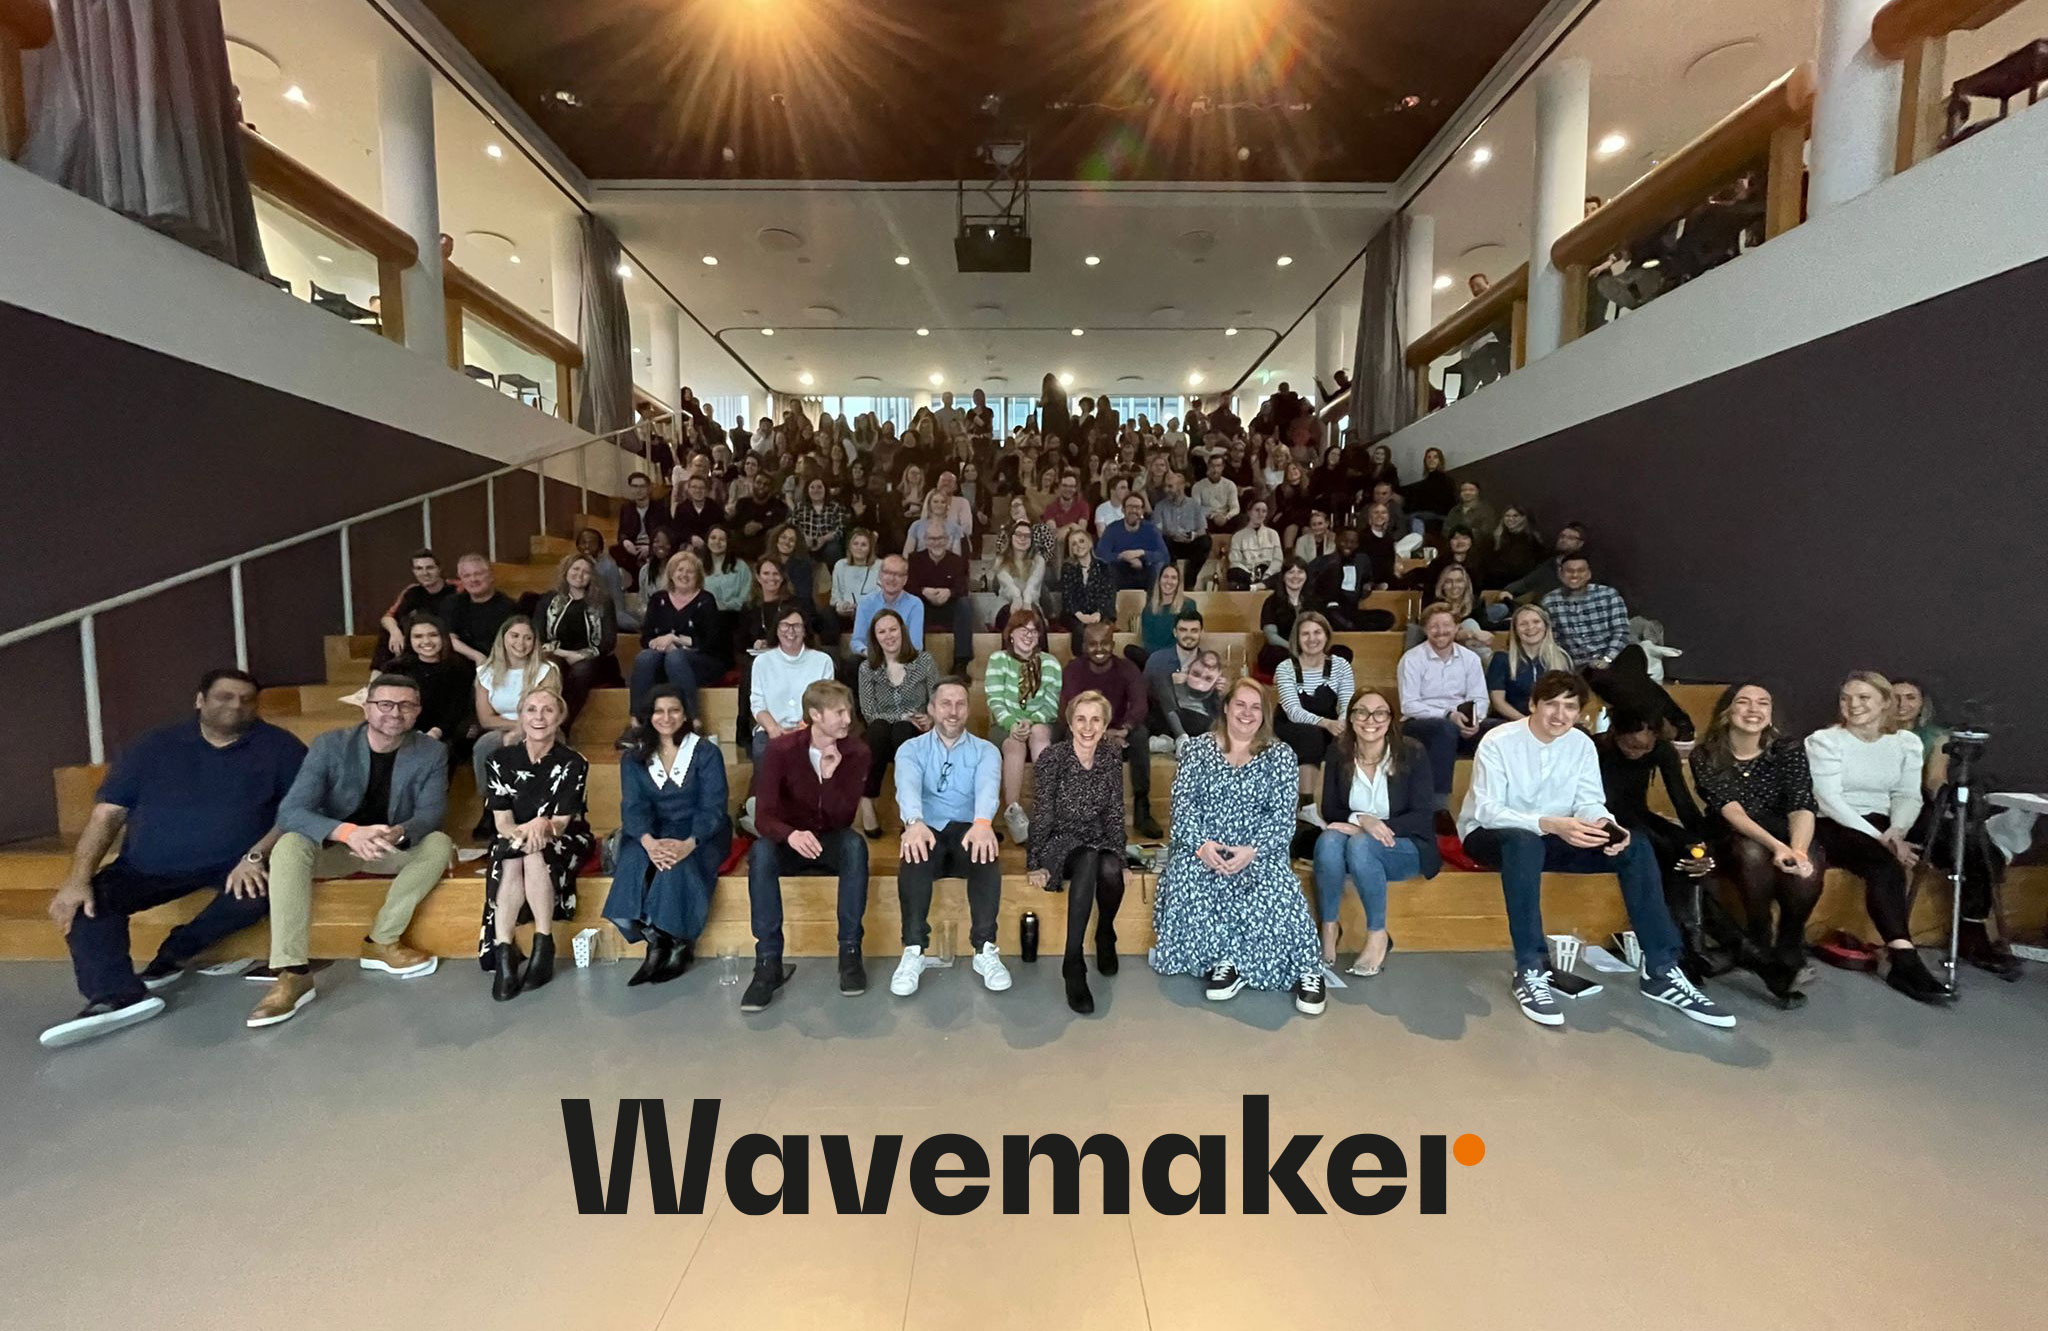 Image: Wavemaker are finalists for Public Sector Content Campaign of the Year